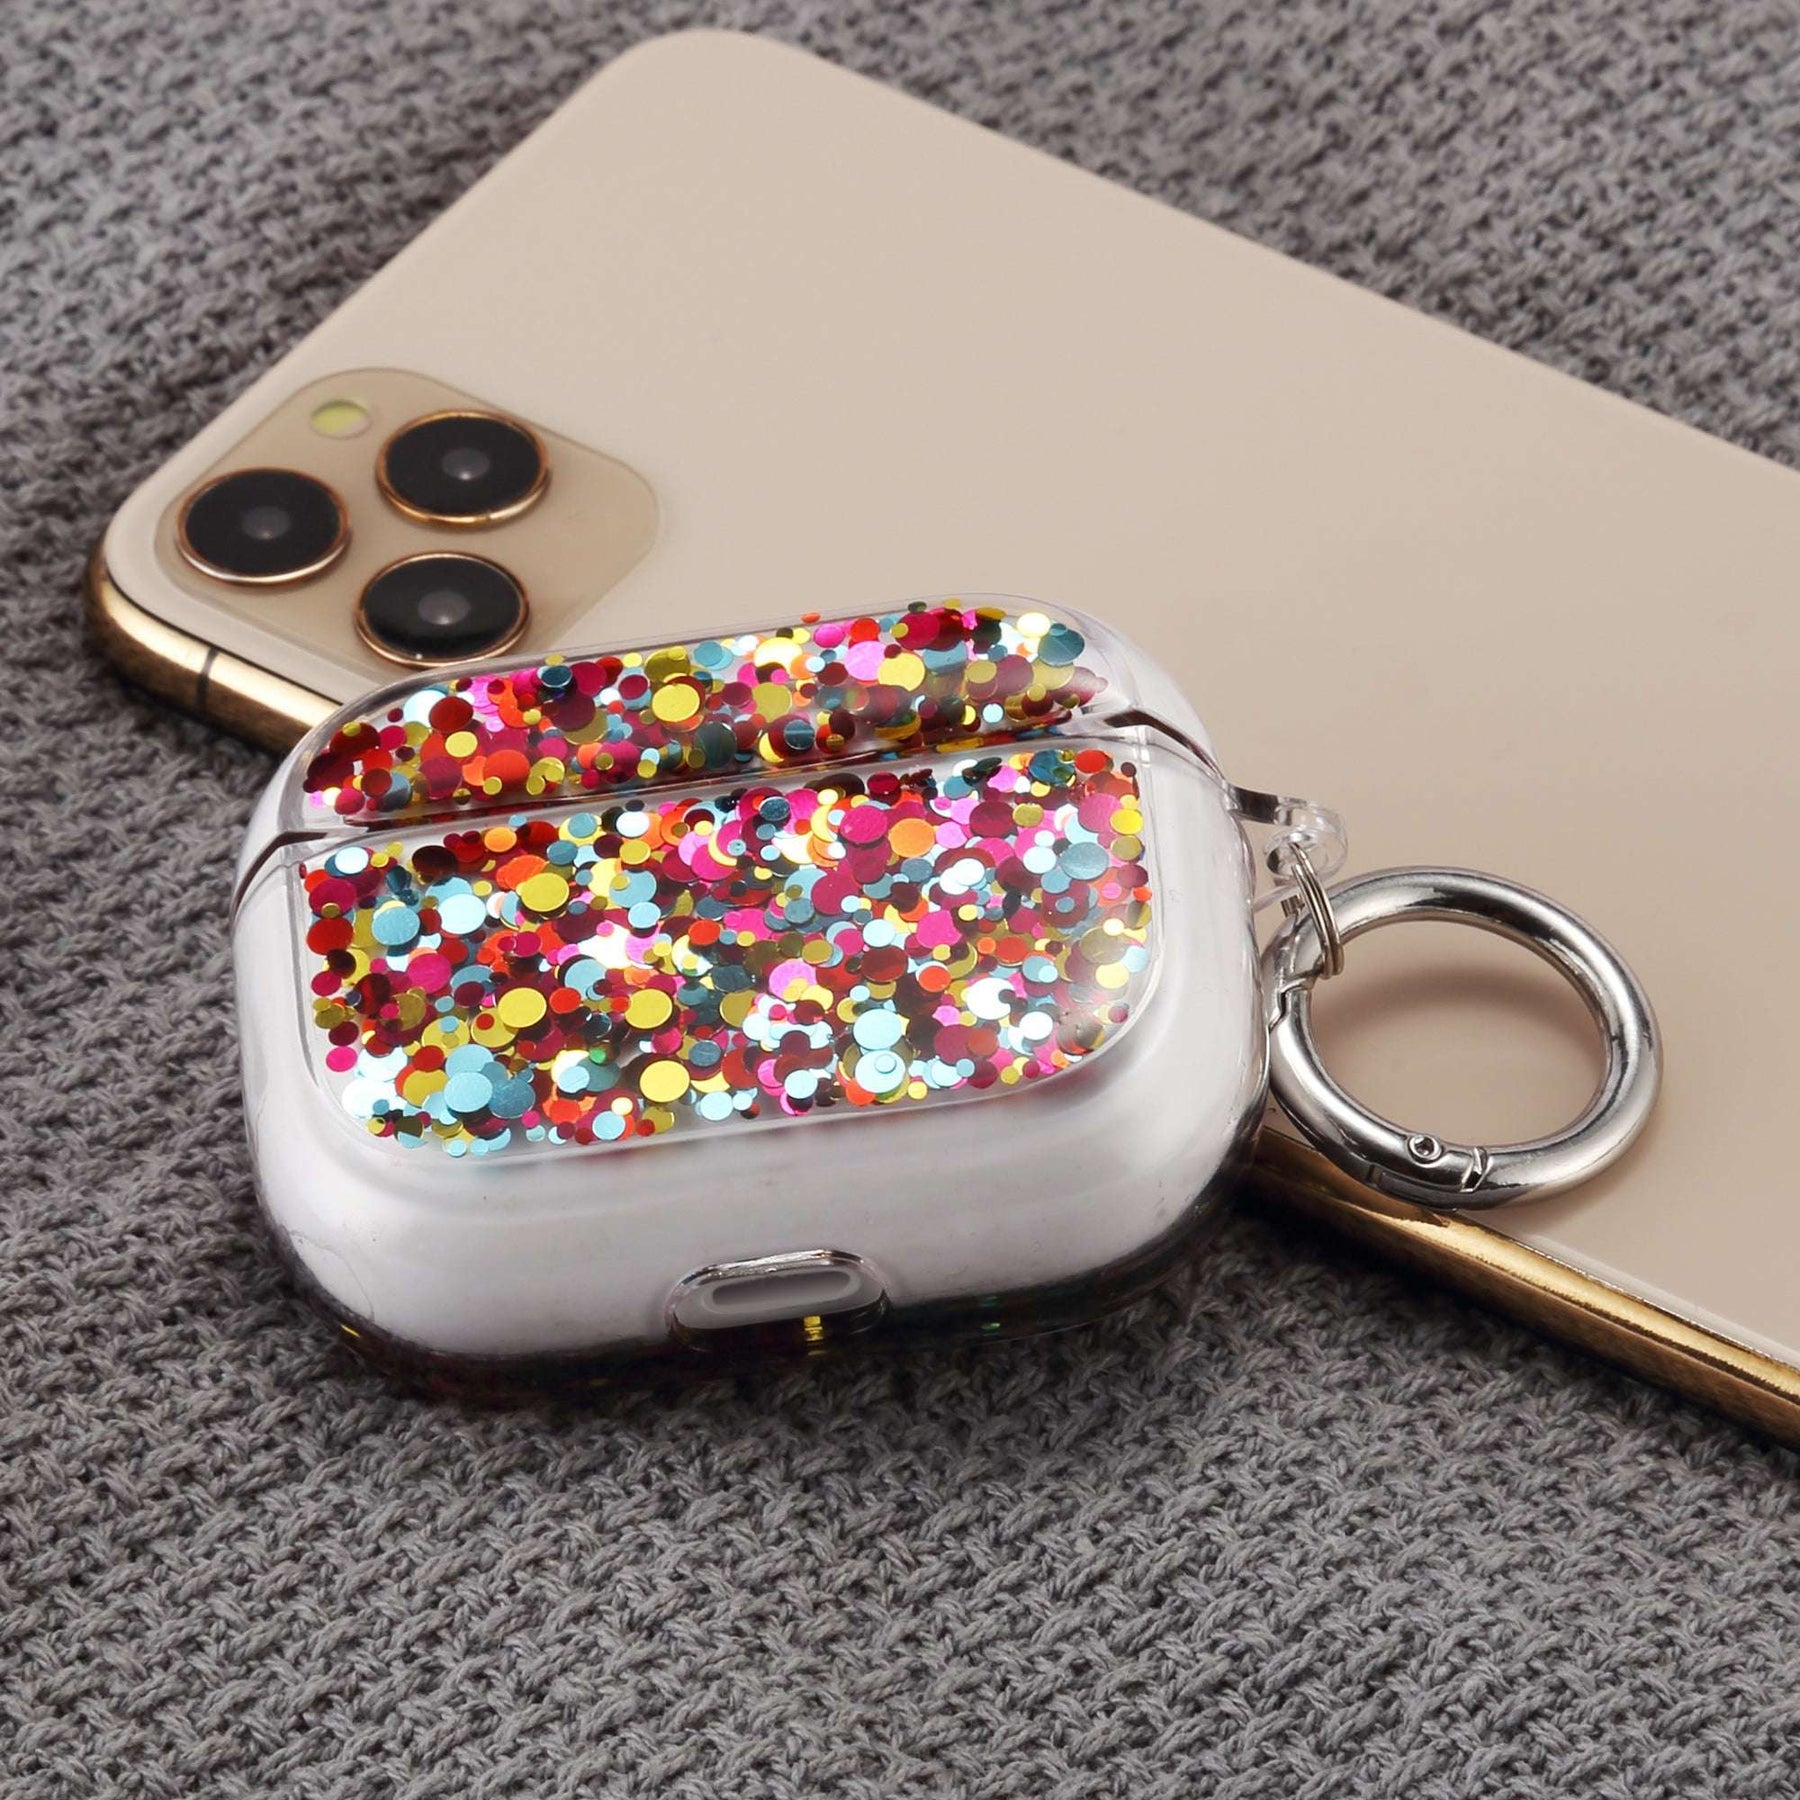 Apple Airpods Pro Charging Case Cover Luxury Novelty Glitter